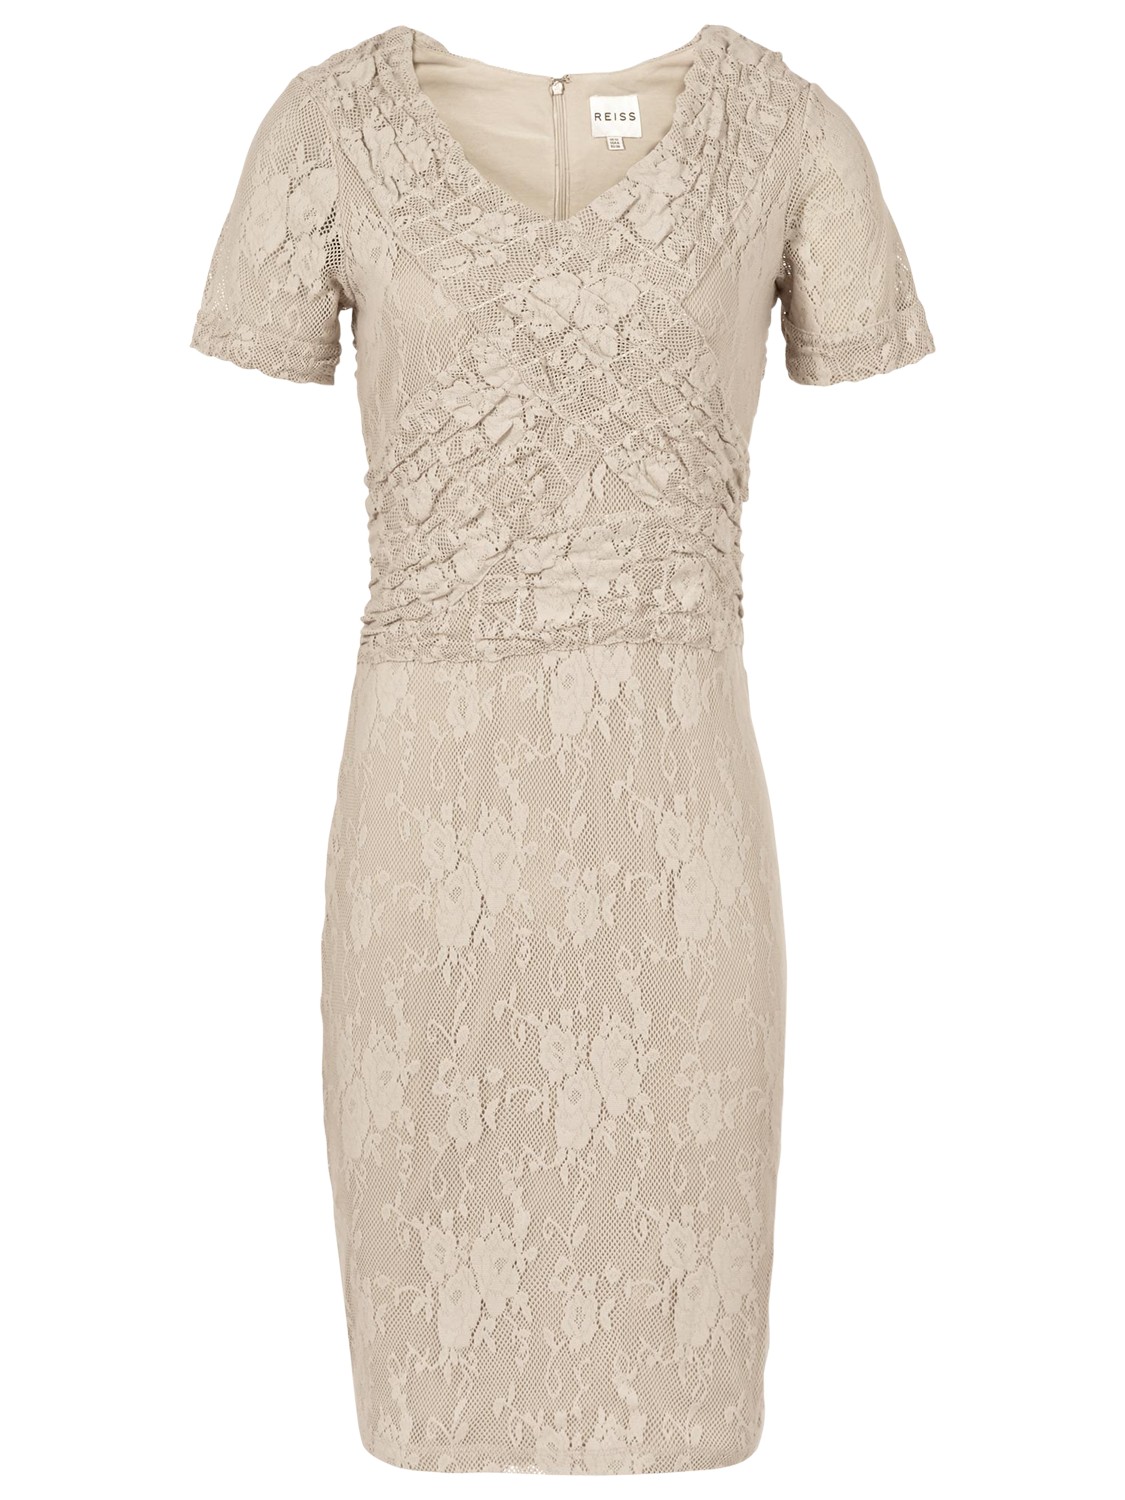 Reiss Lace Cross Front Dress in Gold ( champagne) | Lyst